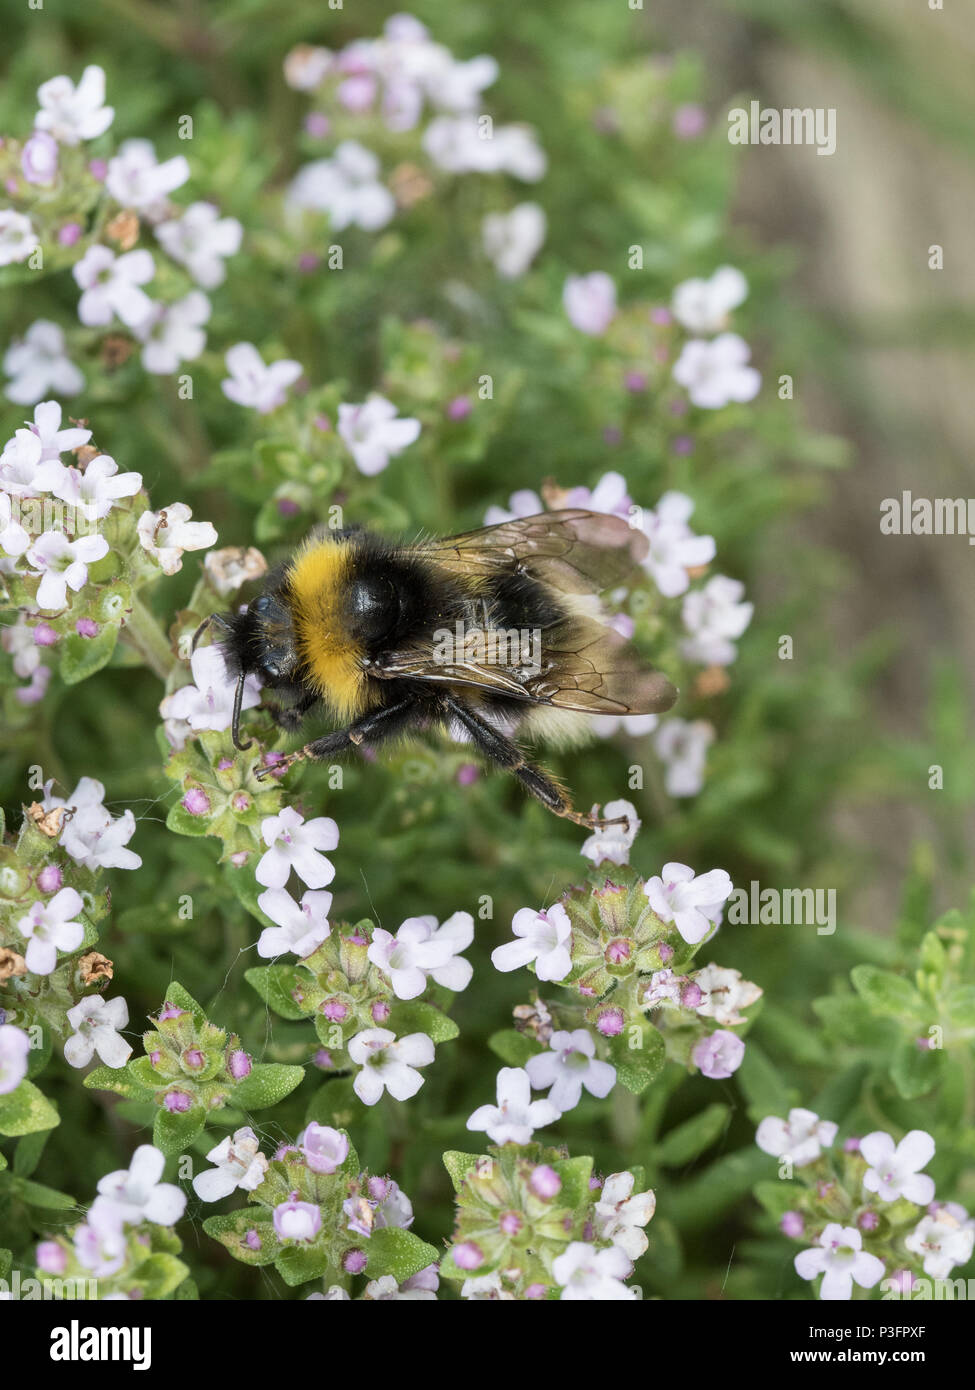 A close up of a white tailed bumble bee feeding on thyme flowers Stock Photo